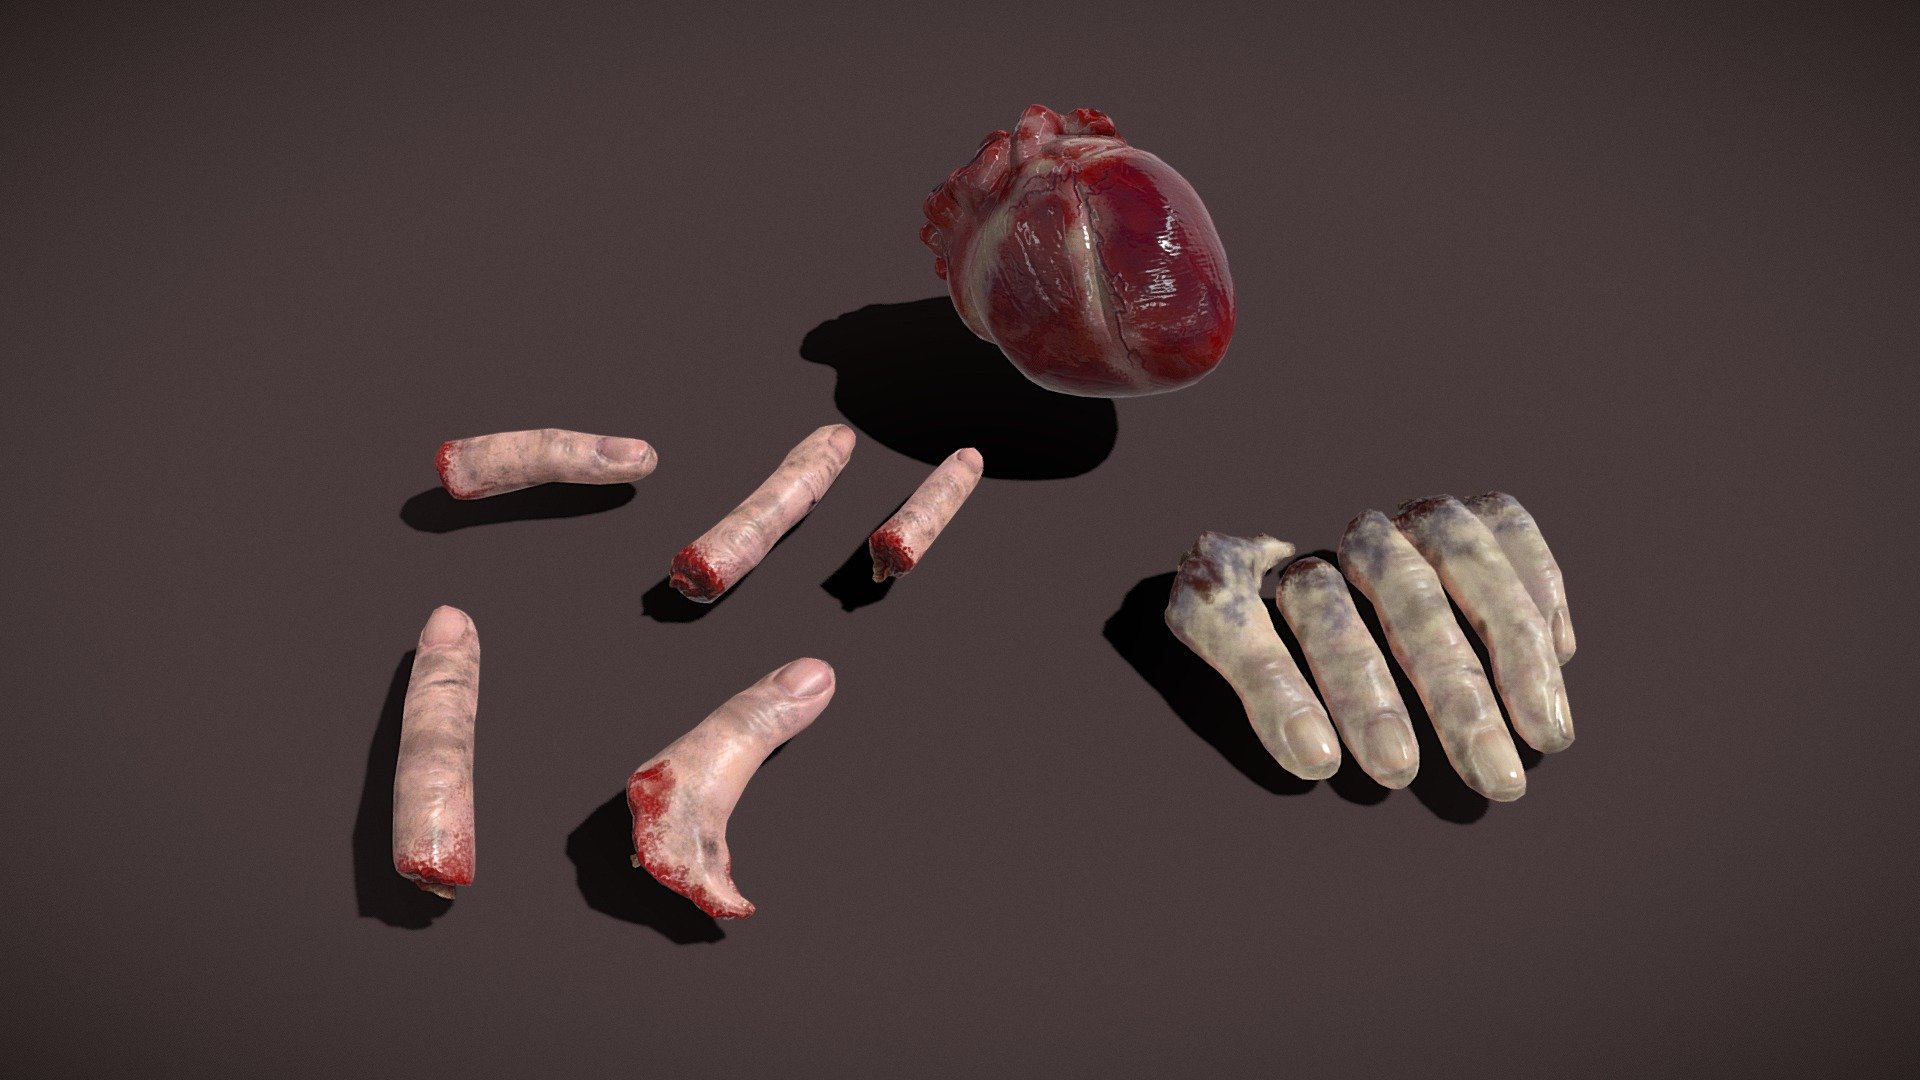 Severed Fingers and Heart 3D Model Set. PBR Texture available in 4096 x 4096 Maps include : Basecolor, Normal, Roughness, Height and Metallic. These Models are part of a larger pack. Visit our Shop to get more severed body parts.  Scaled to real world scale. Customer Service Guaranteed. From the Creators at Get Dead Entertainment. Please like and Rate! Follow us on FaceBook and Instagram to keep updated on all our newest models. https://www.facebook.com/GetDeadEntertainment/ - Heart and Severed Fingers Pack - Buy Royalty Free 3D model by GetDeadEntertainment 3d model